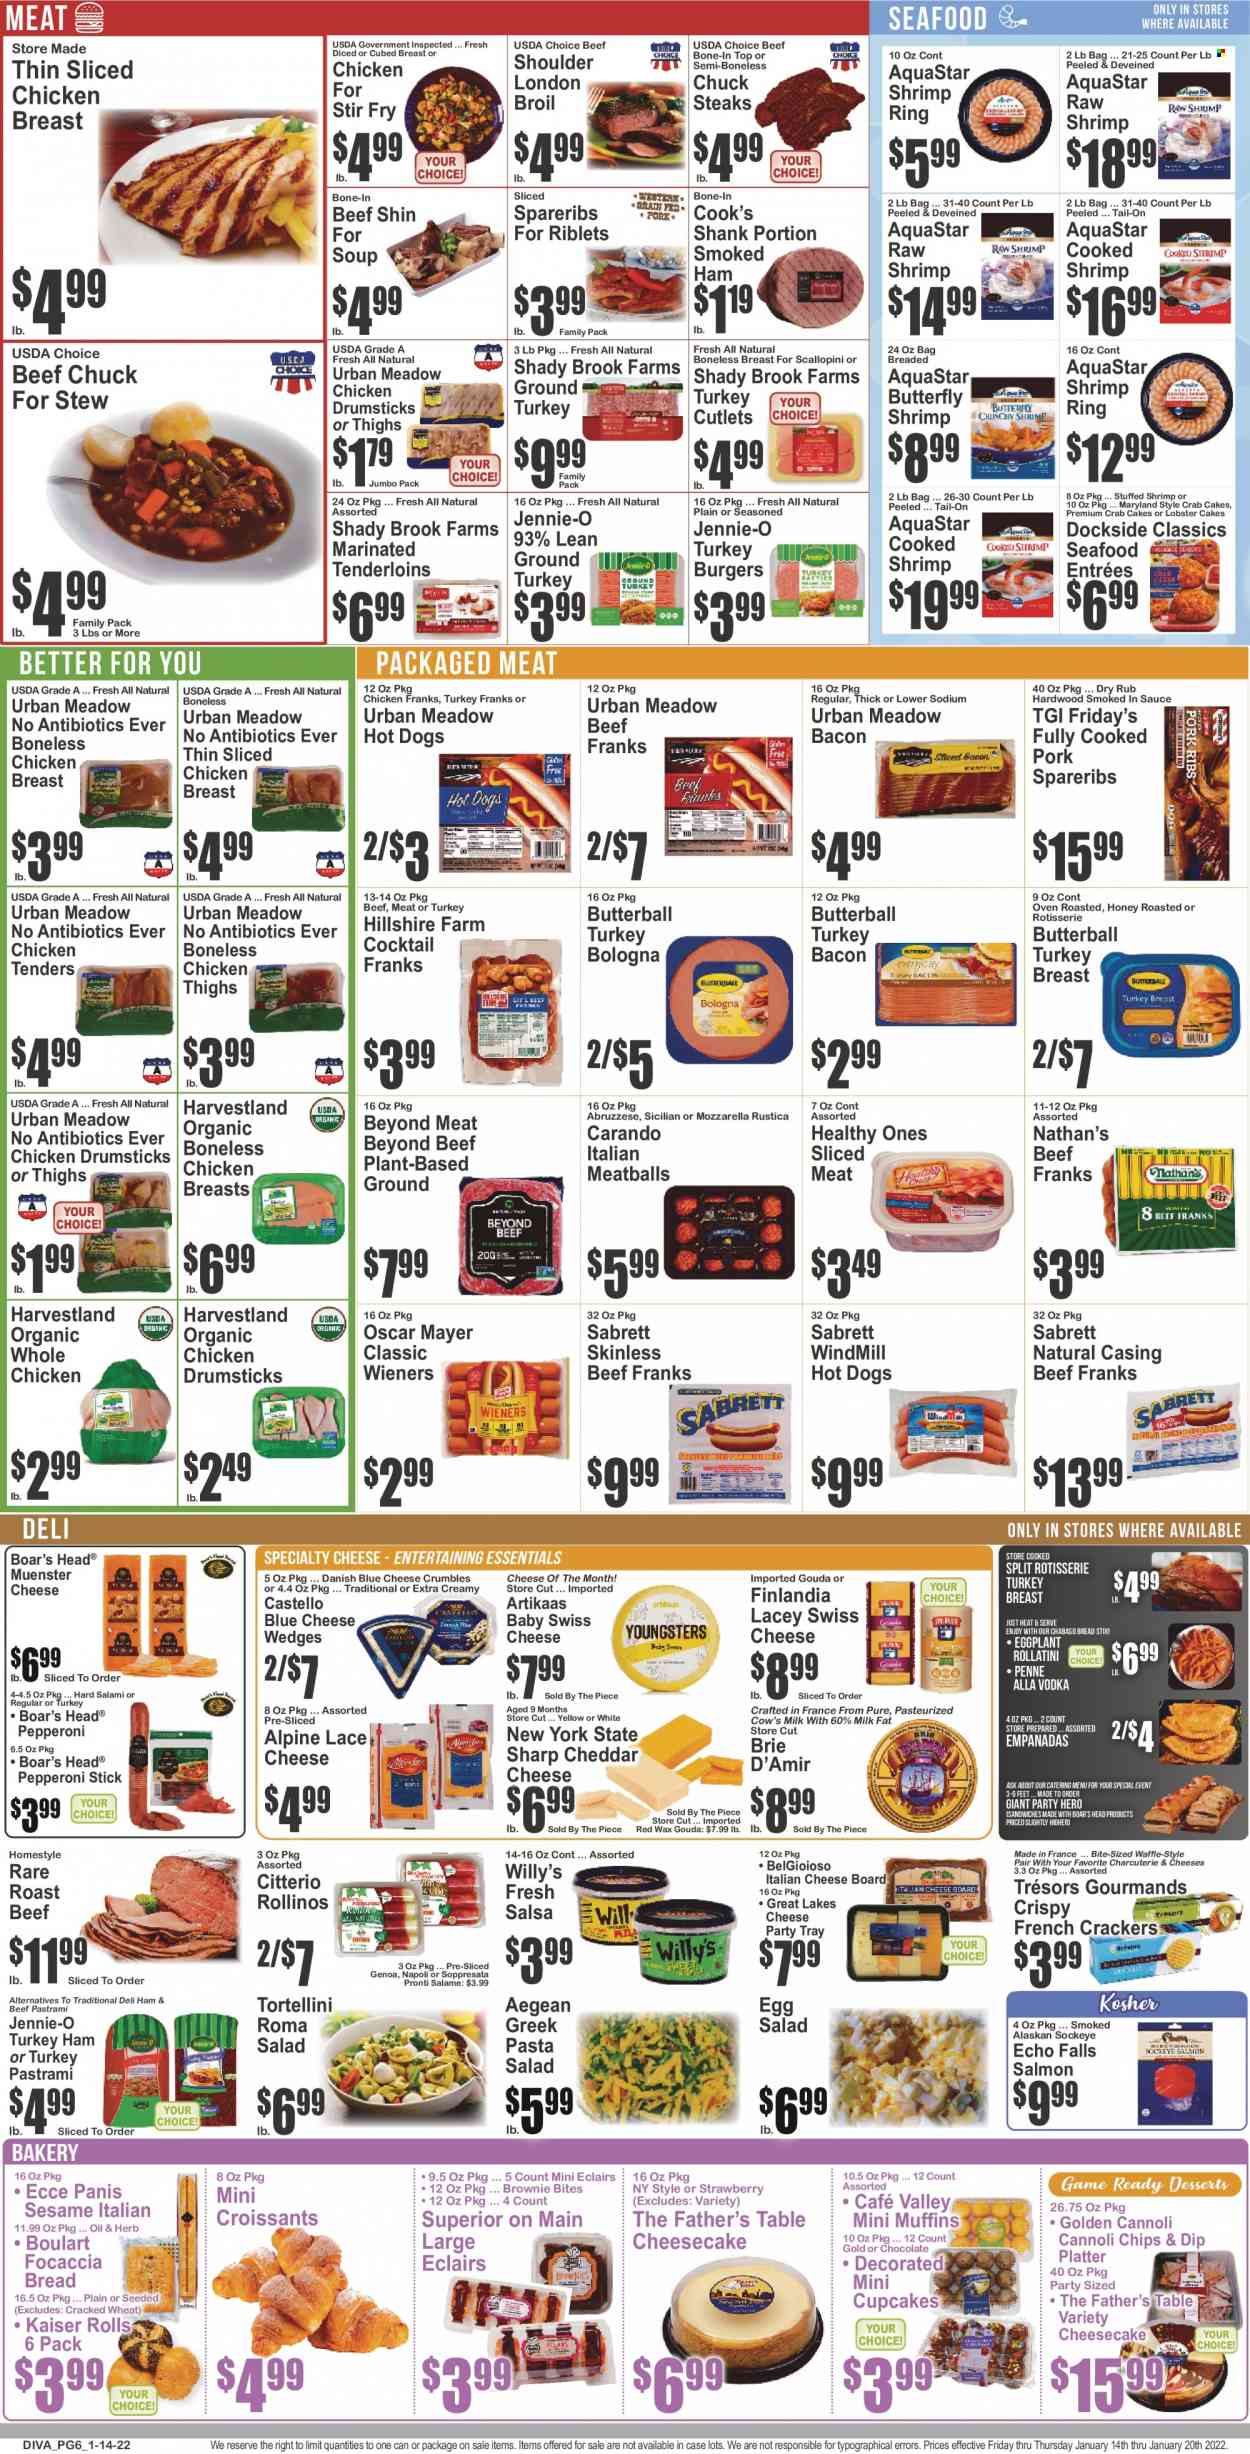 thumbnail - Key Food Flyer - 01/14/2022 - 01/20/2022 - Sales products - bread, croissant, focaccia, Father's Table, cupcake, cheesecake, brownies, muffin, artichoke, salad, eggplant, lobster, salmon, seafood, shrimps, crab cake, lobster cakes, hot dog, chicken tenders, meatballs, sandwich, soup, hamburger, pasta, tortellini, bacon, Butterball, salami, turkey bacon, ham, Hillshire Farm, pastrami, smoked ham, bologna sausage, Cook's, Oscar Mayer, pepperoni, chicken frankfurters, pasta salad, blue cheese, gouda, swiss cheese, brie, Münster cheese, cheese crumbles, custard, milk, eggs, dip, quiche, chocolate, crackers, chips, penne, salsa, oil, honey, vodka, ground turkey, whole chicken, chicken thighs, chicken drumsticks, beef meat, steak, roast beef, turkey burger, pork spare ribs, cheese board, beef bone. Page 6.